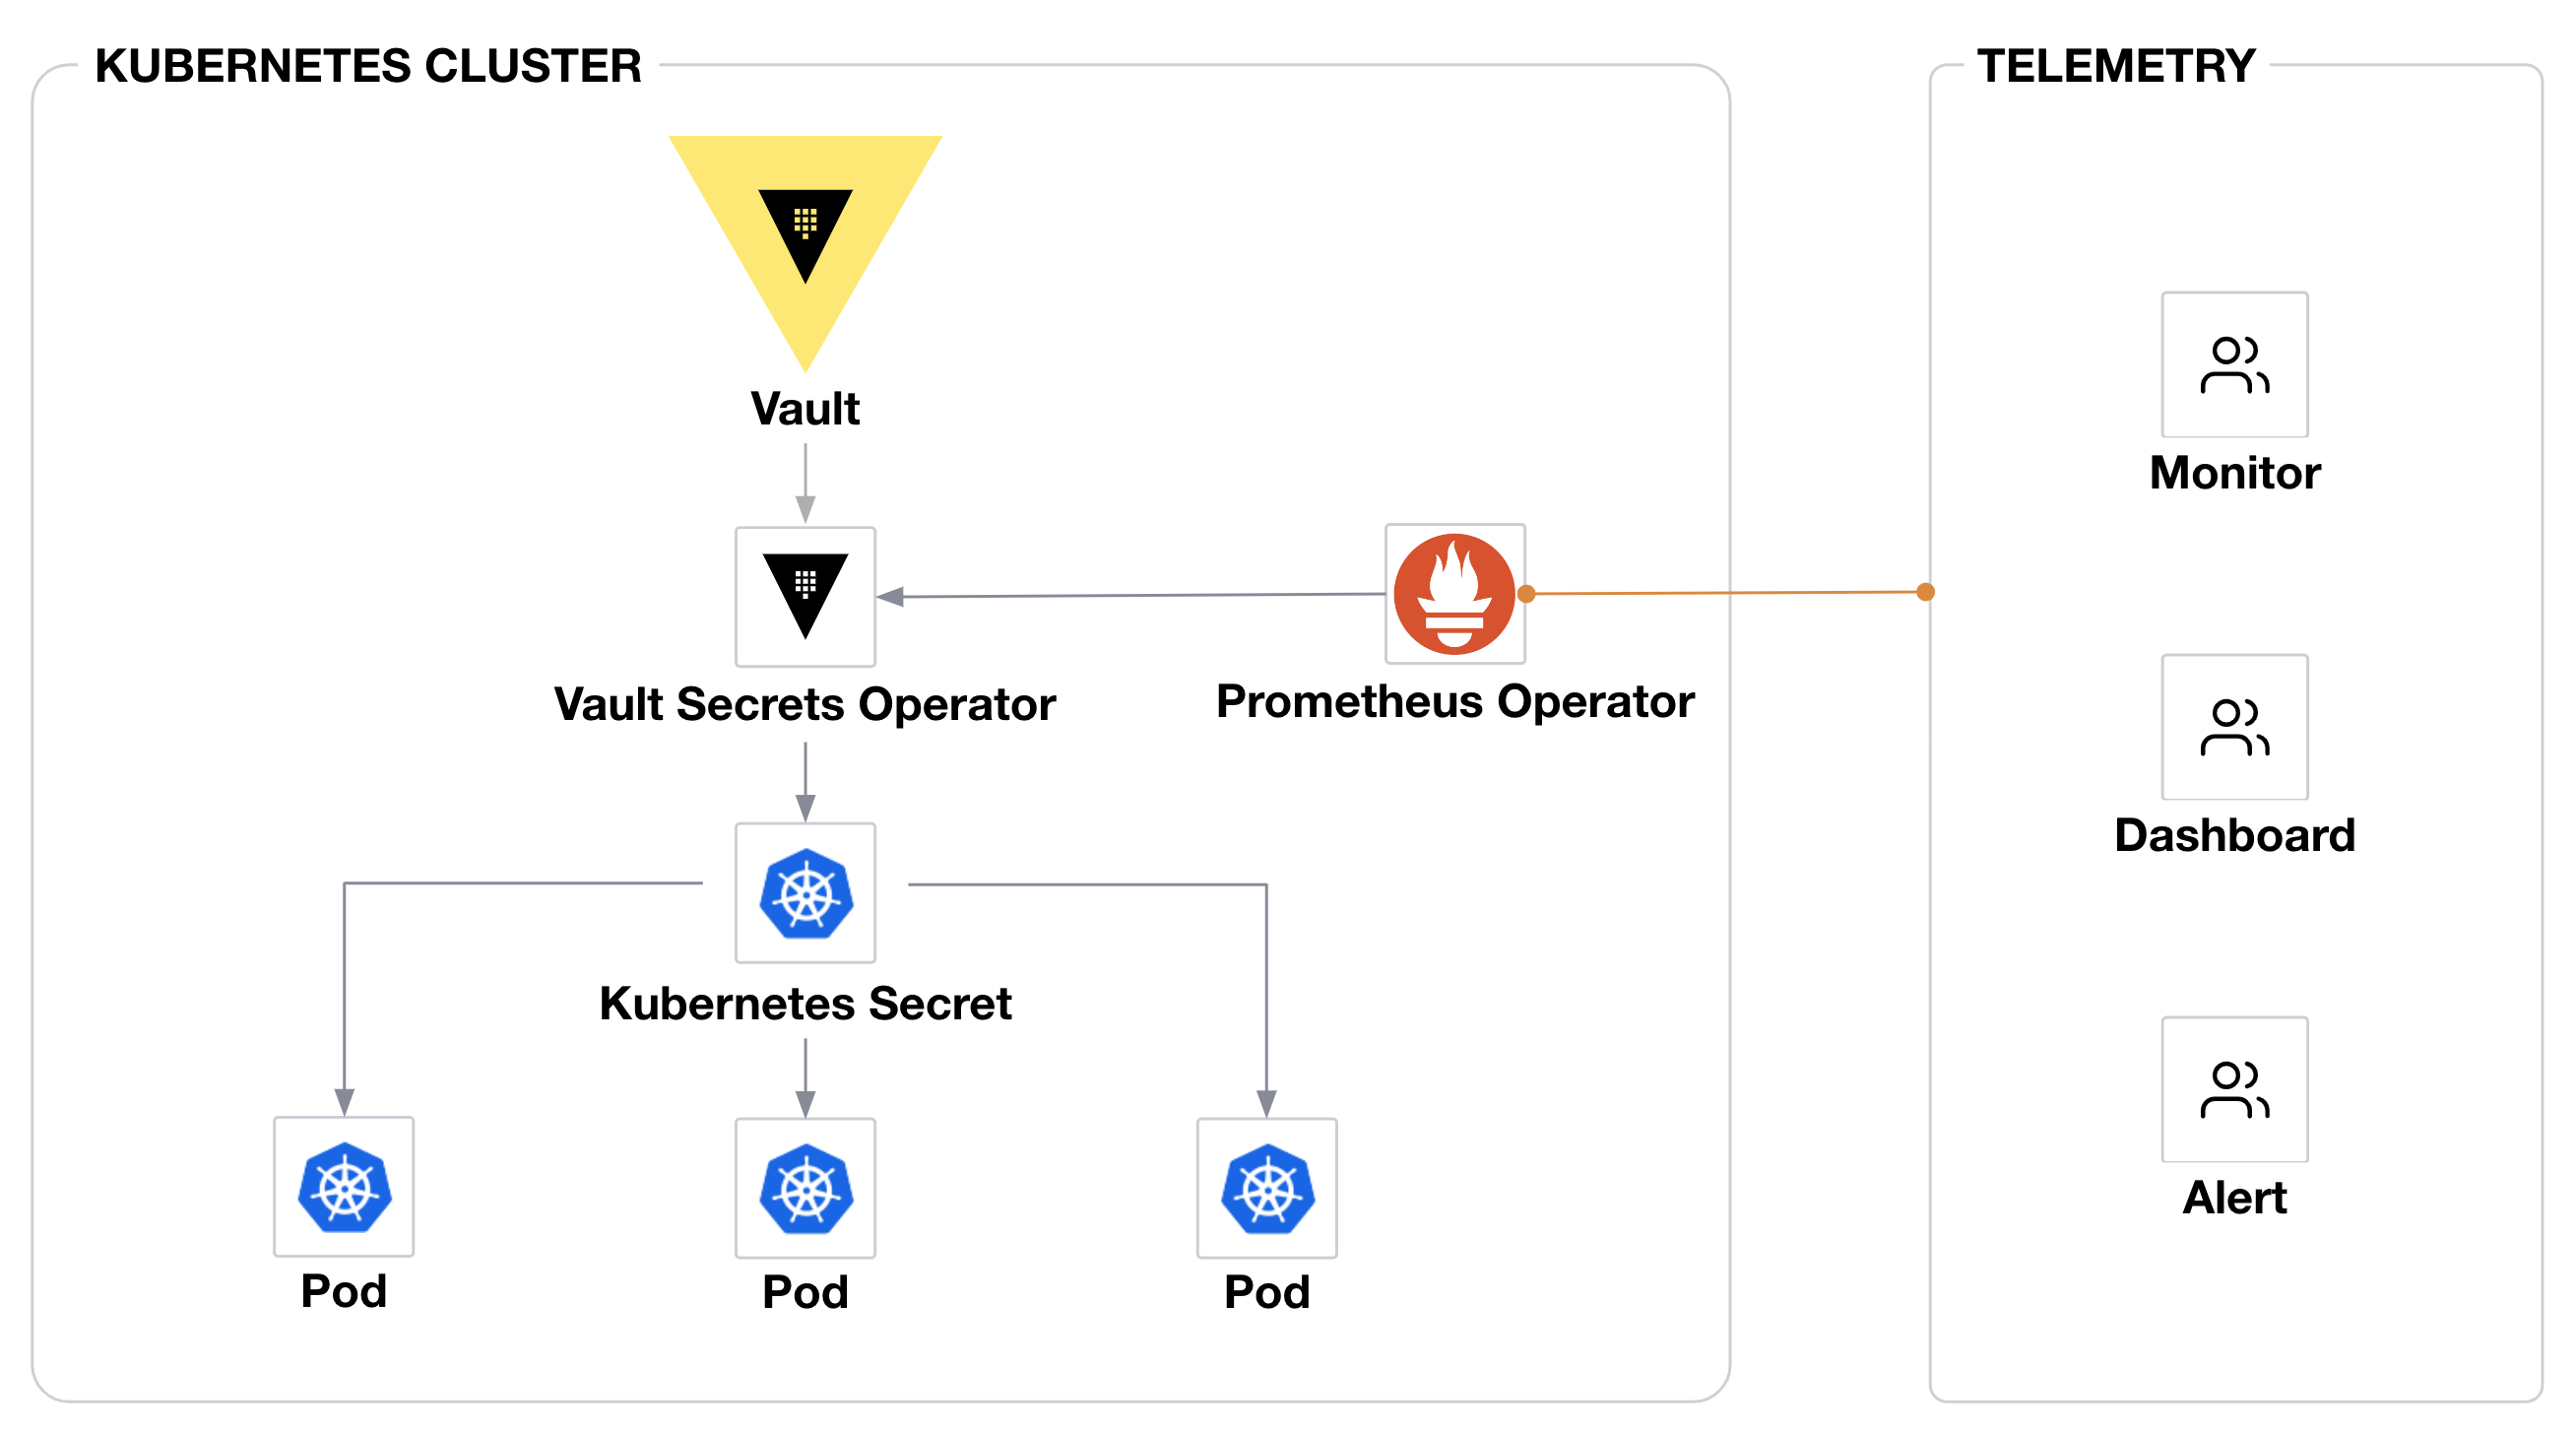 Data flow from VSO to Prometheus Operator to observability tooling